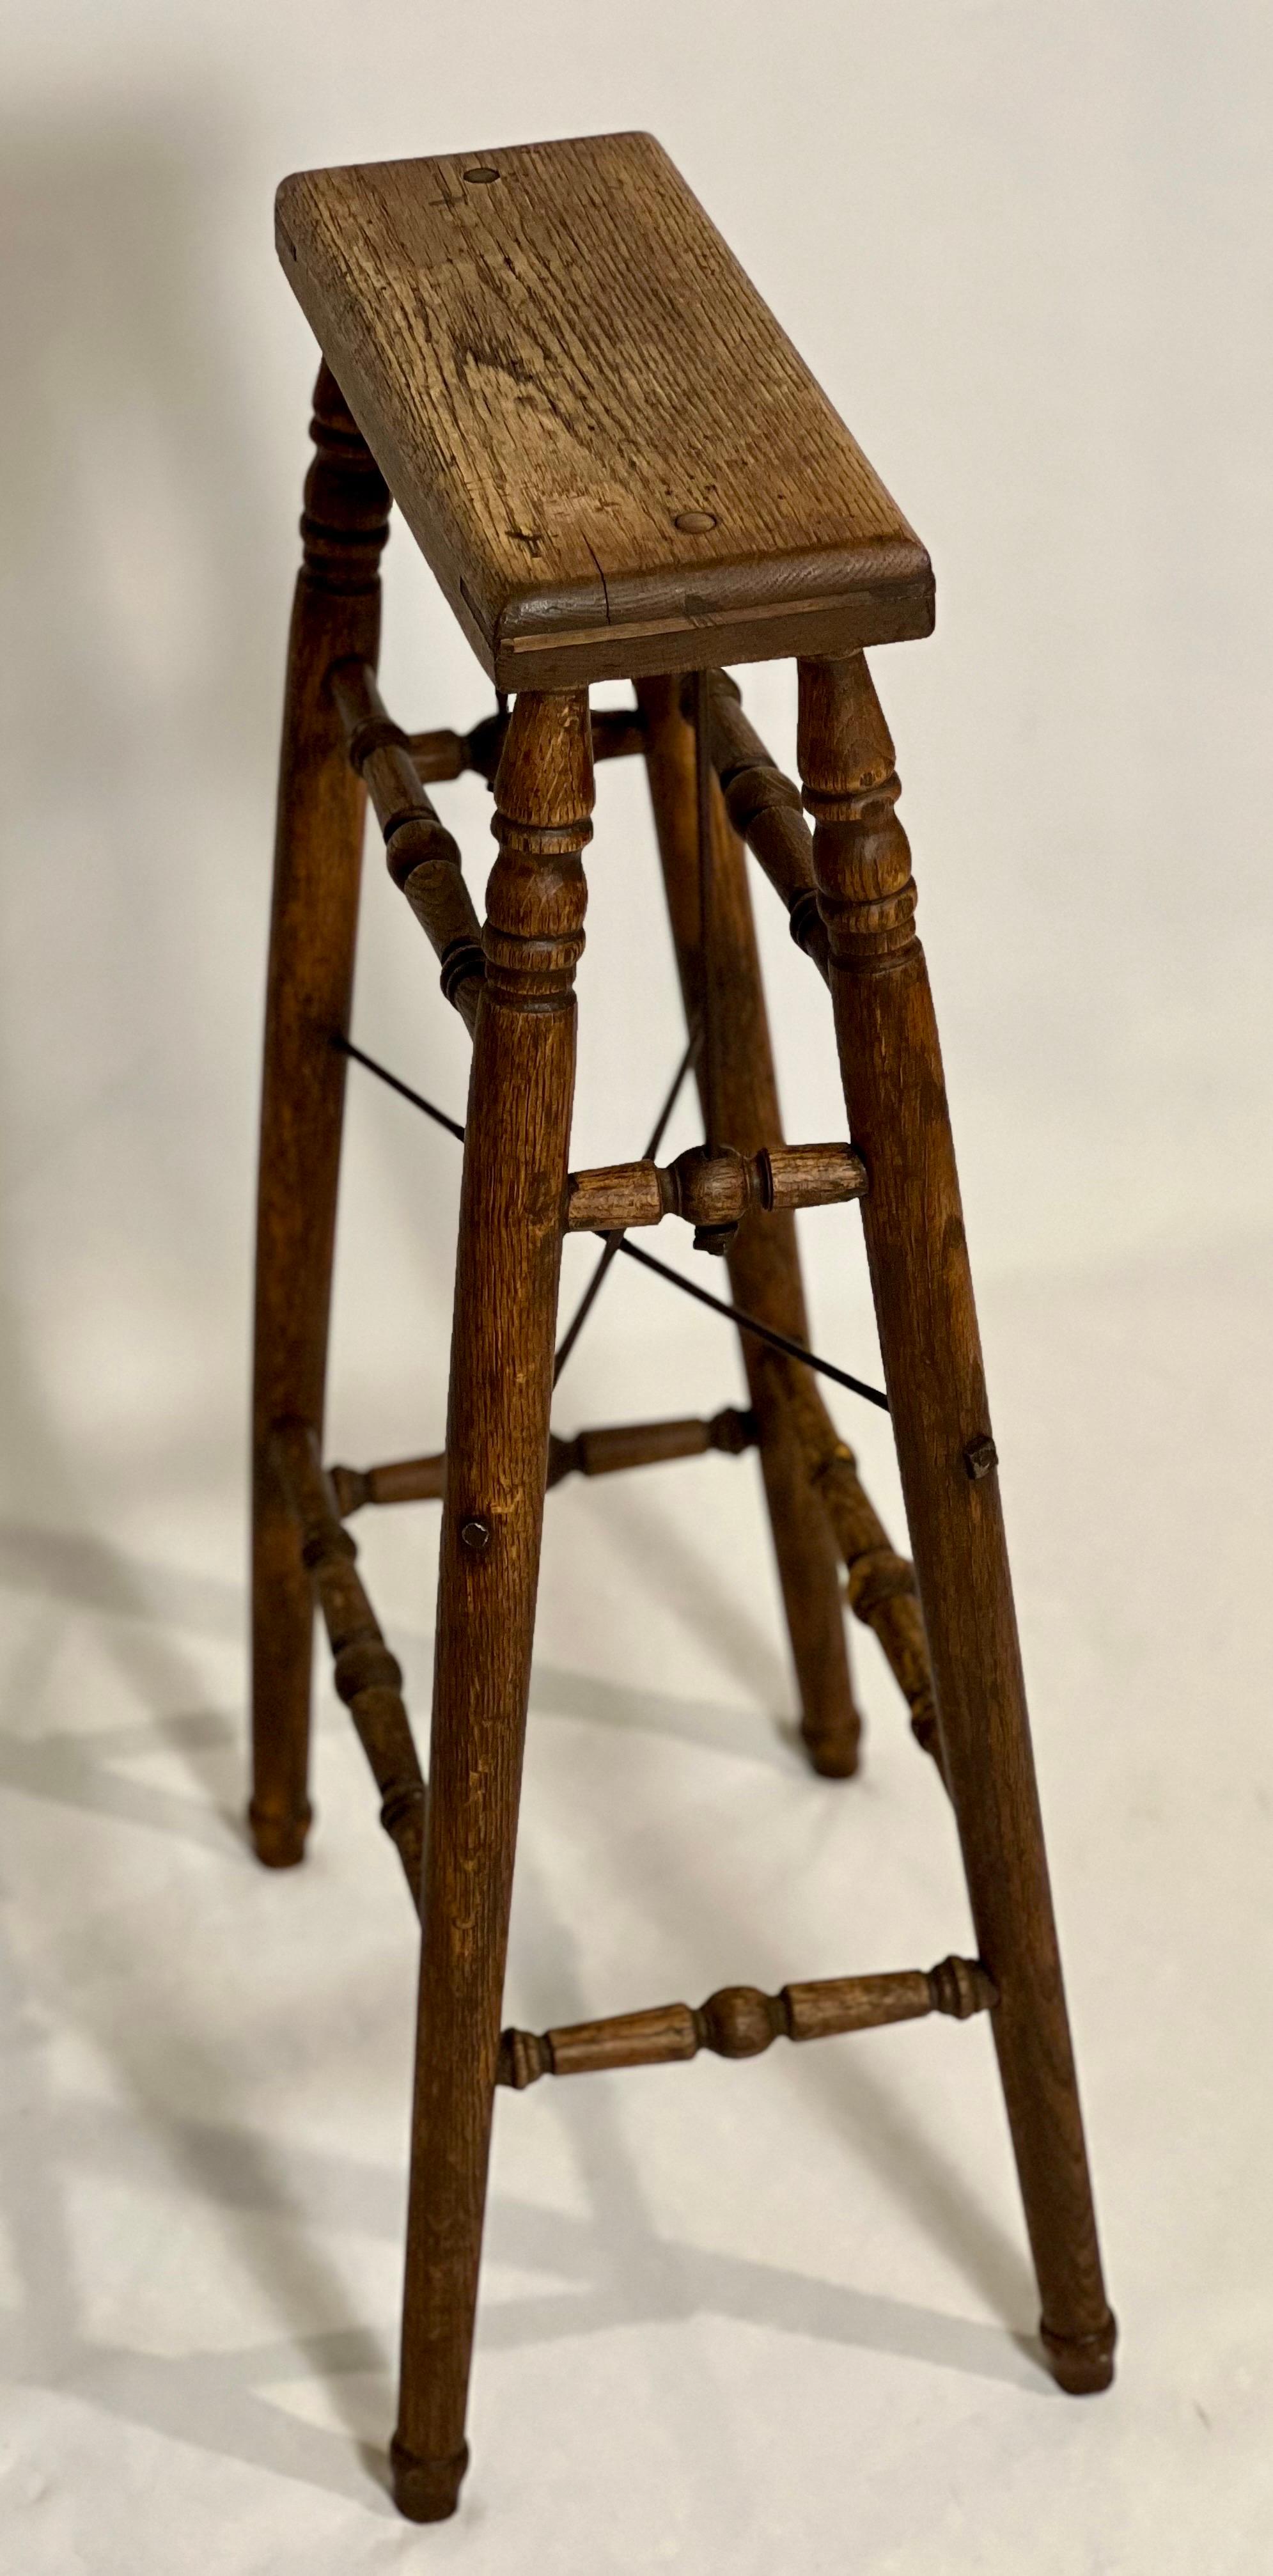 Rustic 19th Century French Turned Oak and Iron Artist's Stand or Stool For Sale